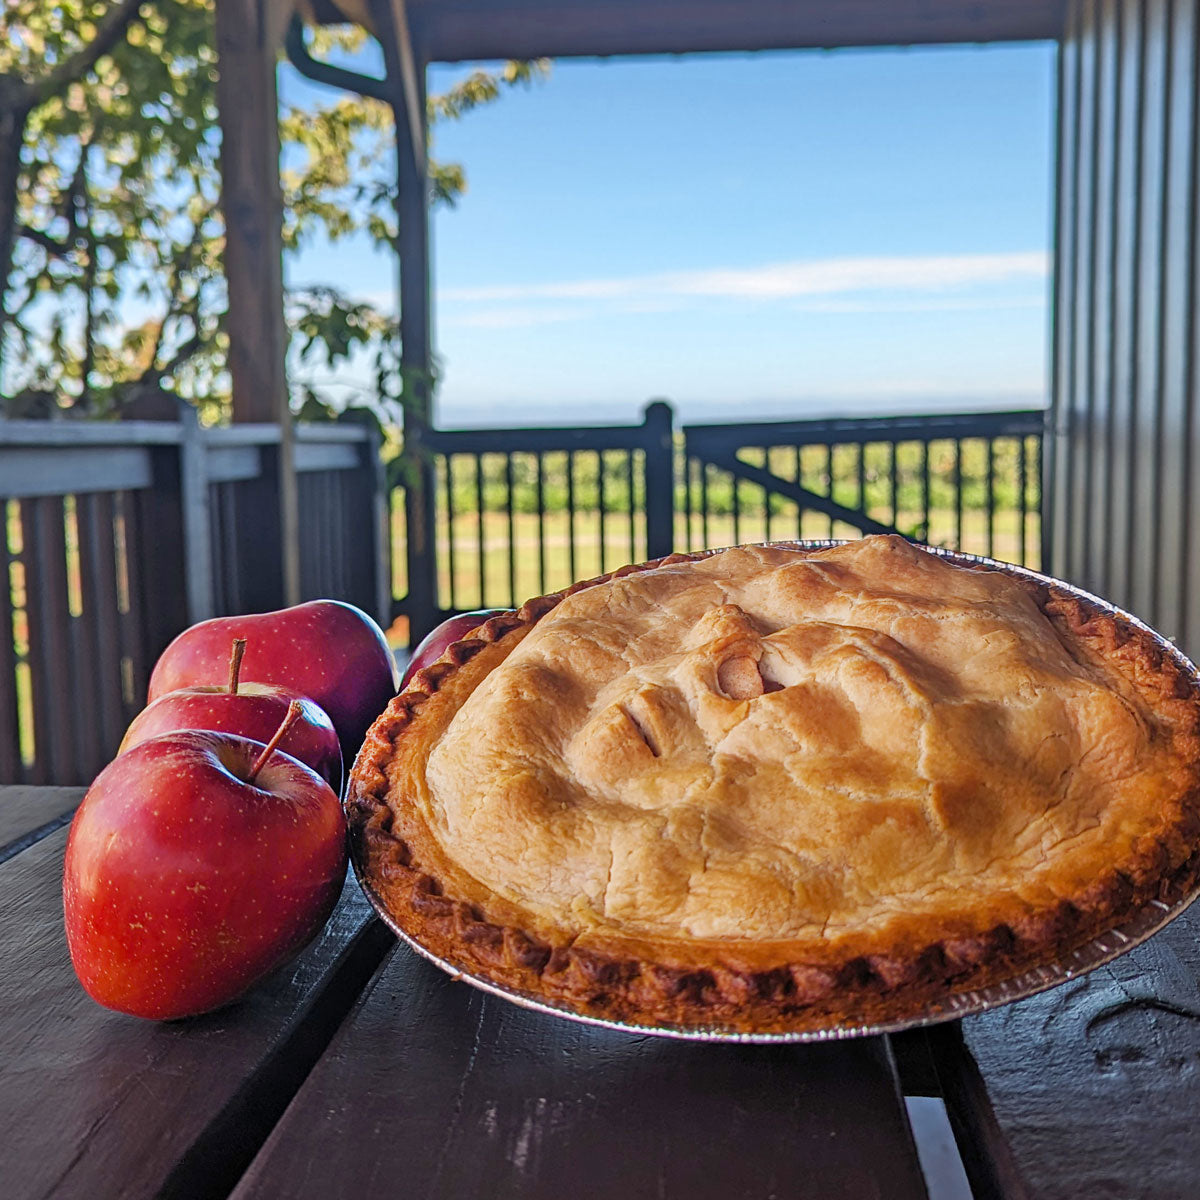 Apple pie next to red apples at an apple orchard